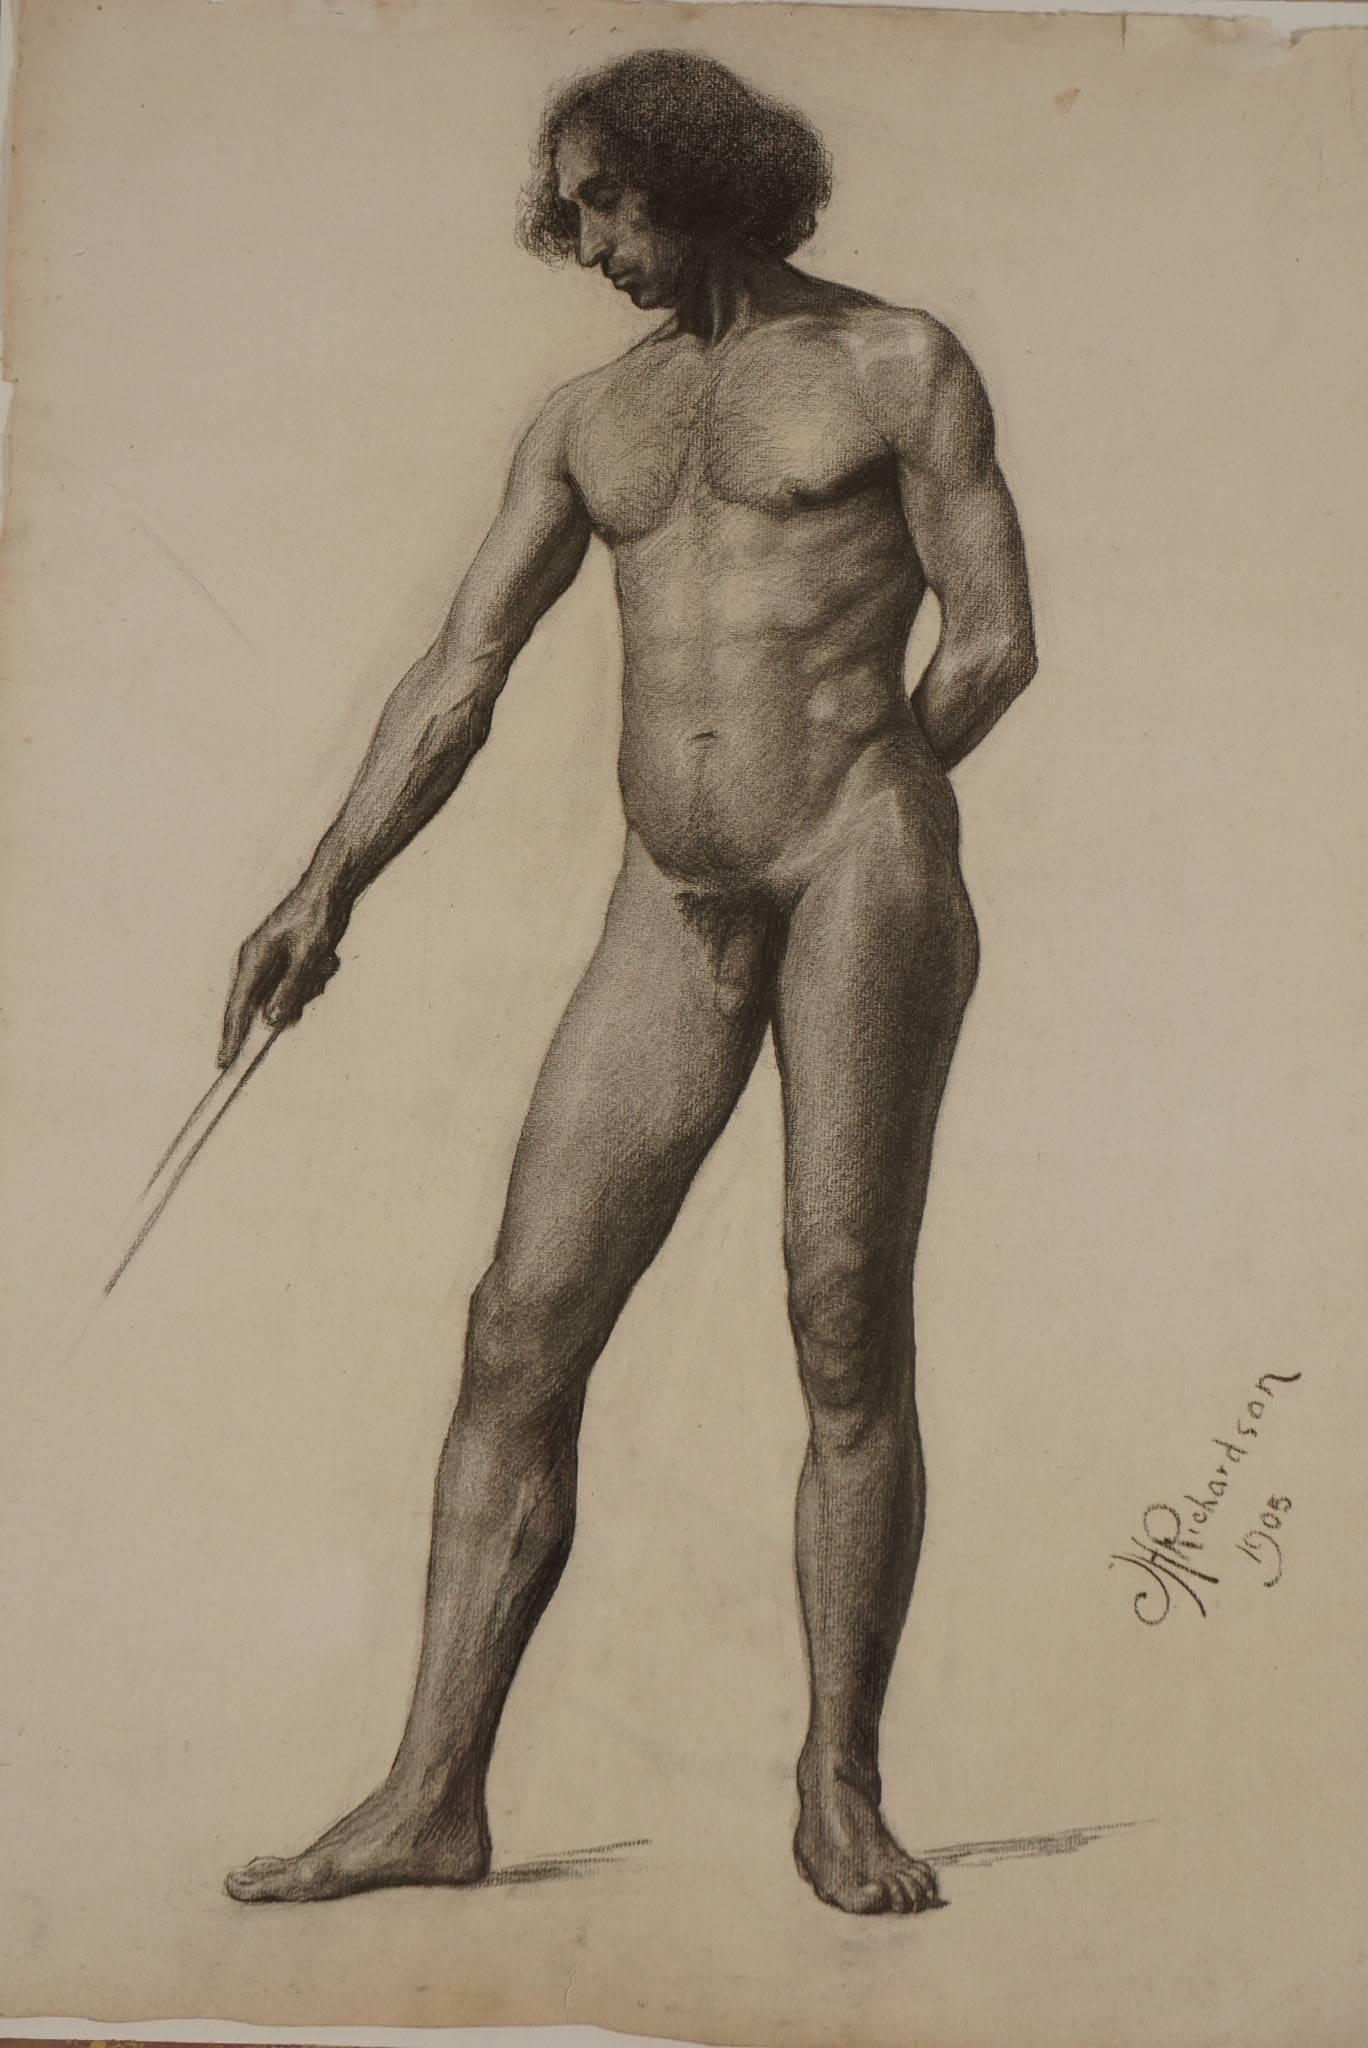 A remarkable large academic charcoal on paper drawing of a standing male nude signed and dated at lower right, JH Richardson, 1905, presented French matted in a circa 1940 Italian Baroque style painted and parcel gilt Heydenryk frame having painted